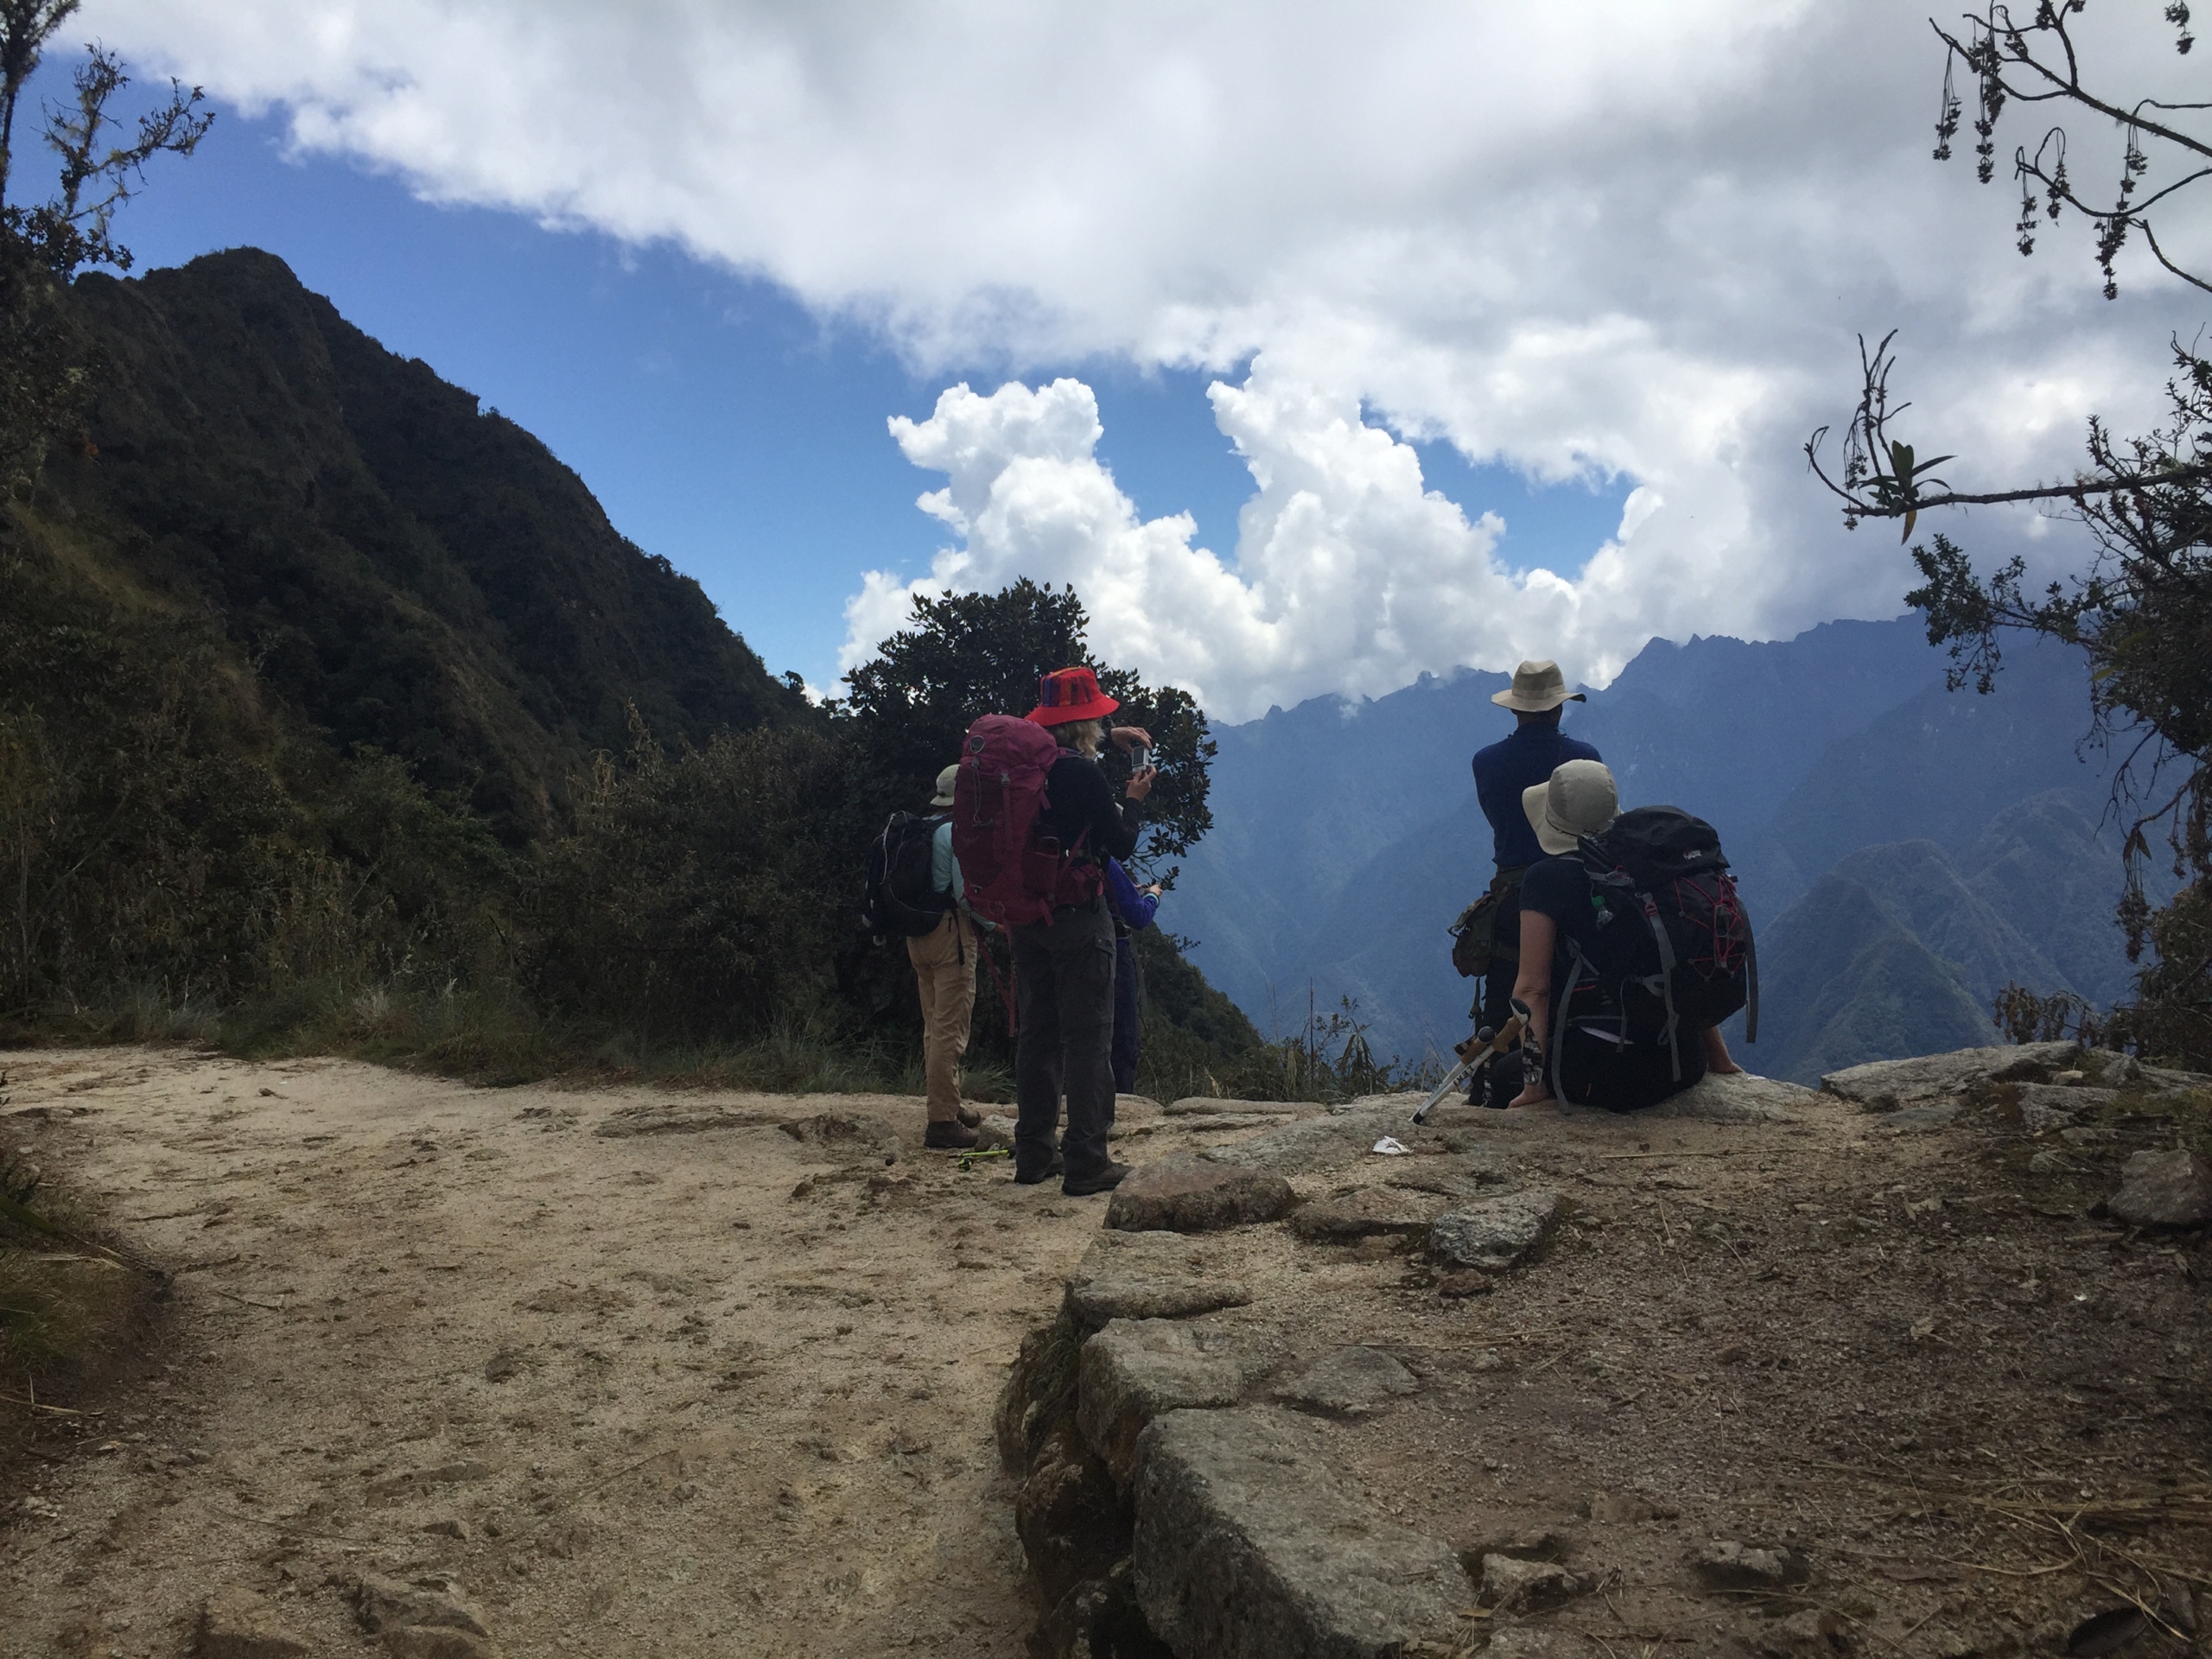 be one of the first ones to enjoy the inca trail on march